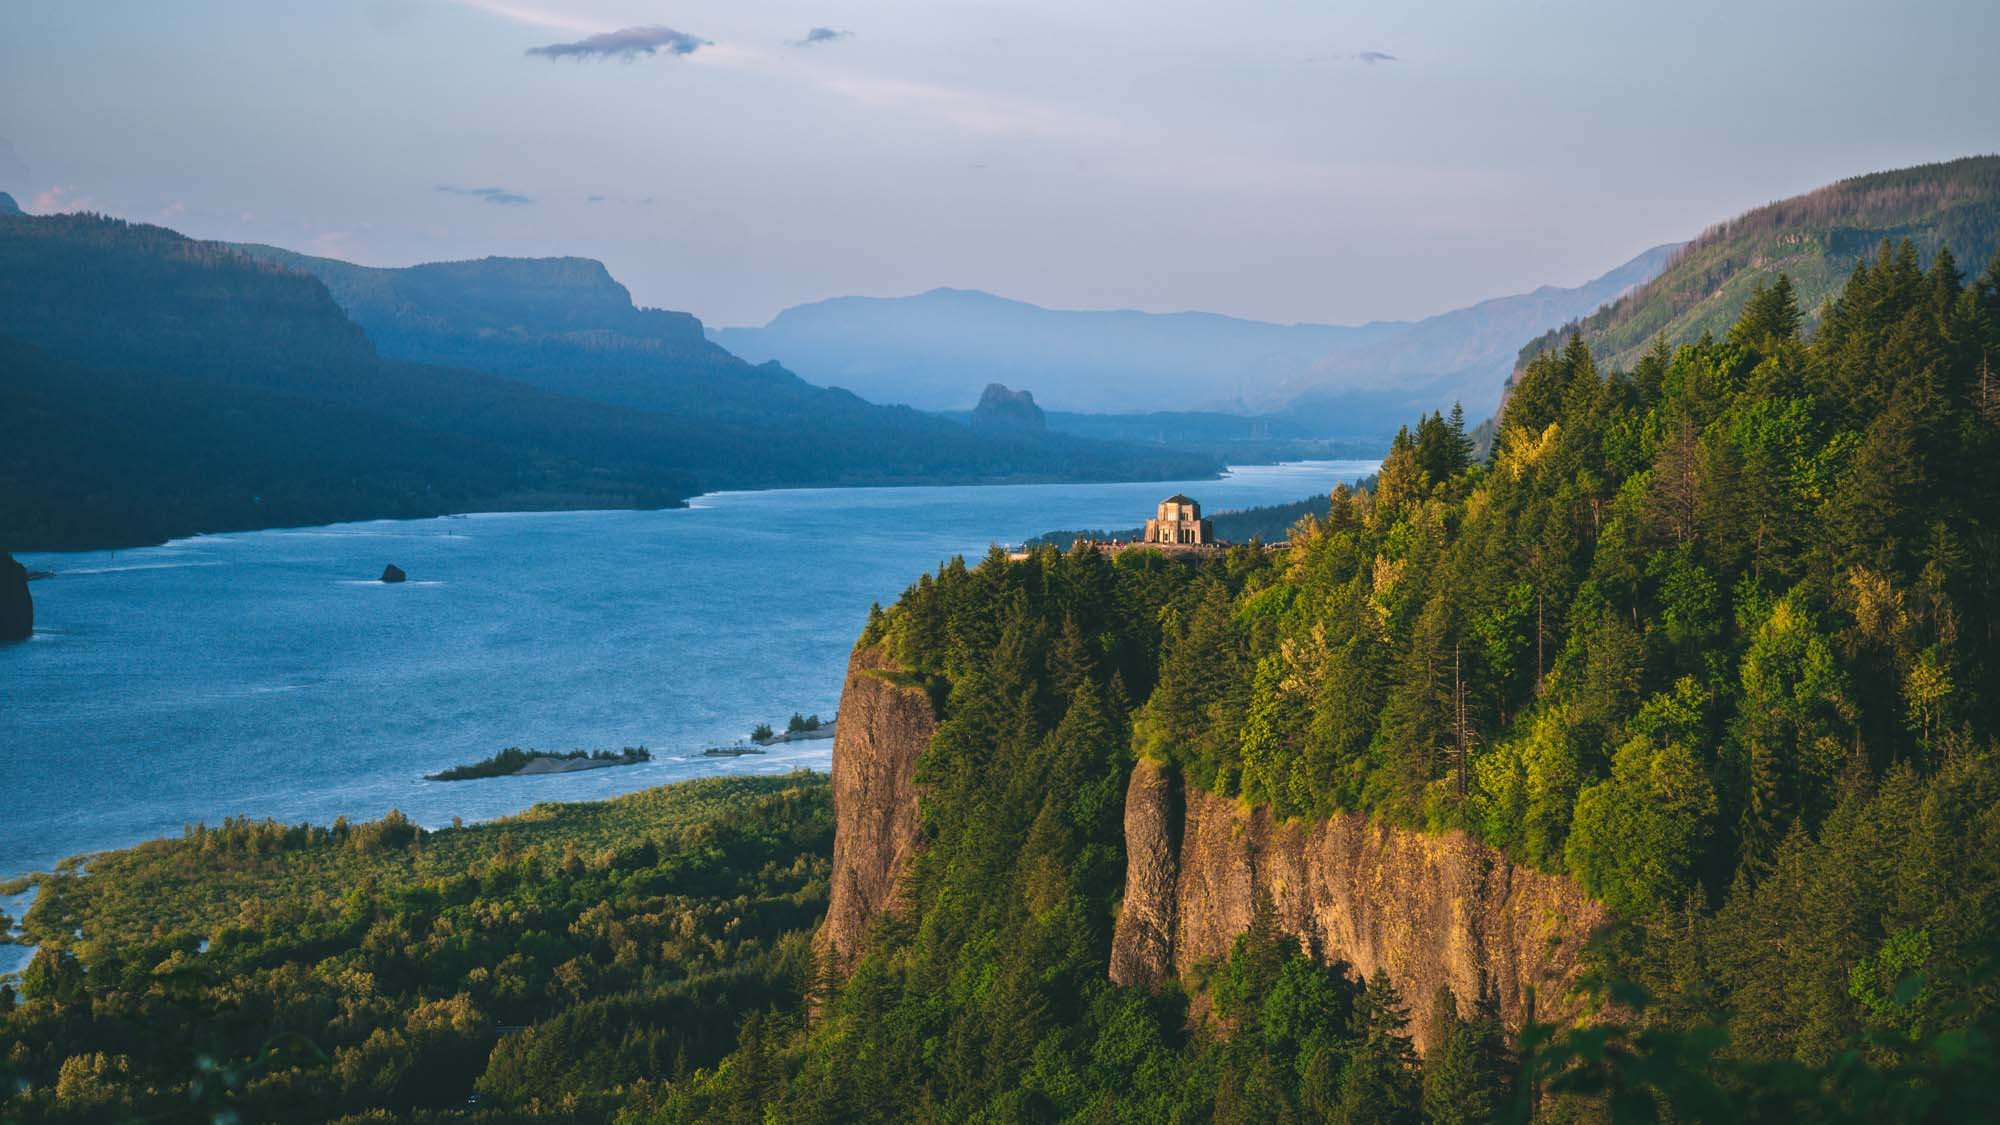 View of Vista House and Columbia River Gorge